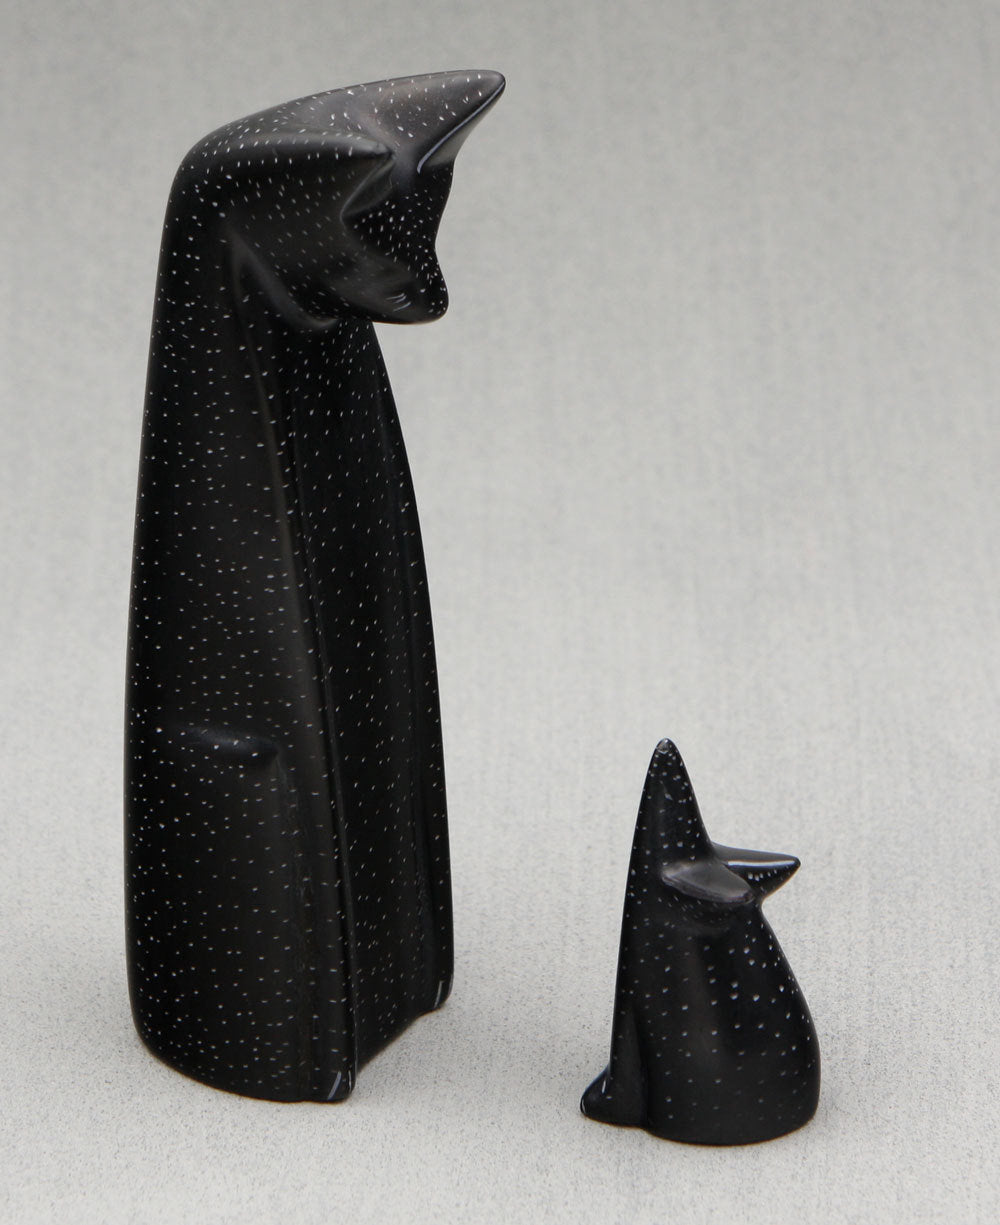 Fair Trade Cat and Mouse Statues